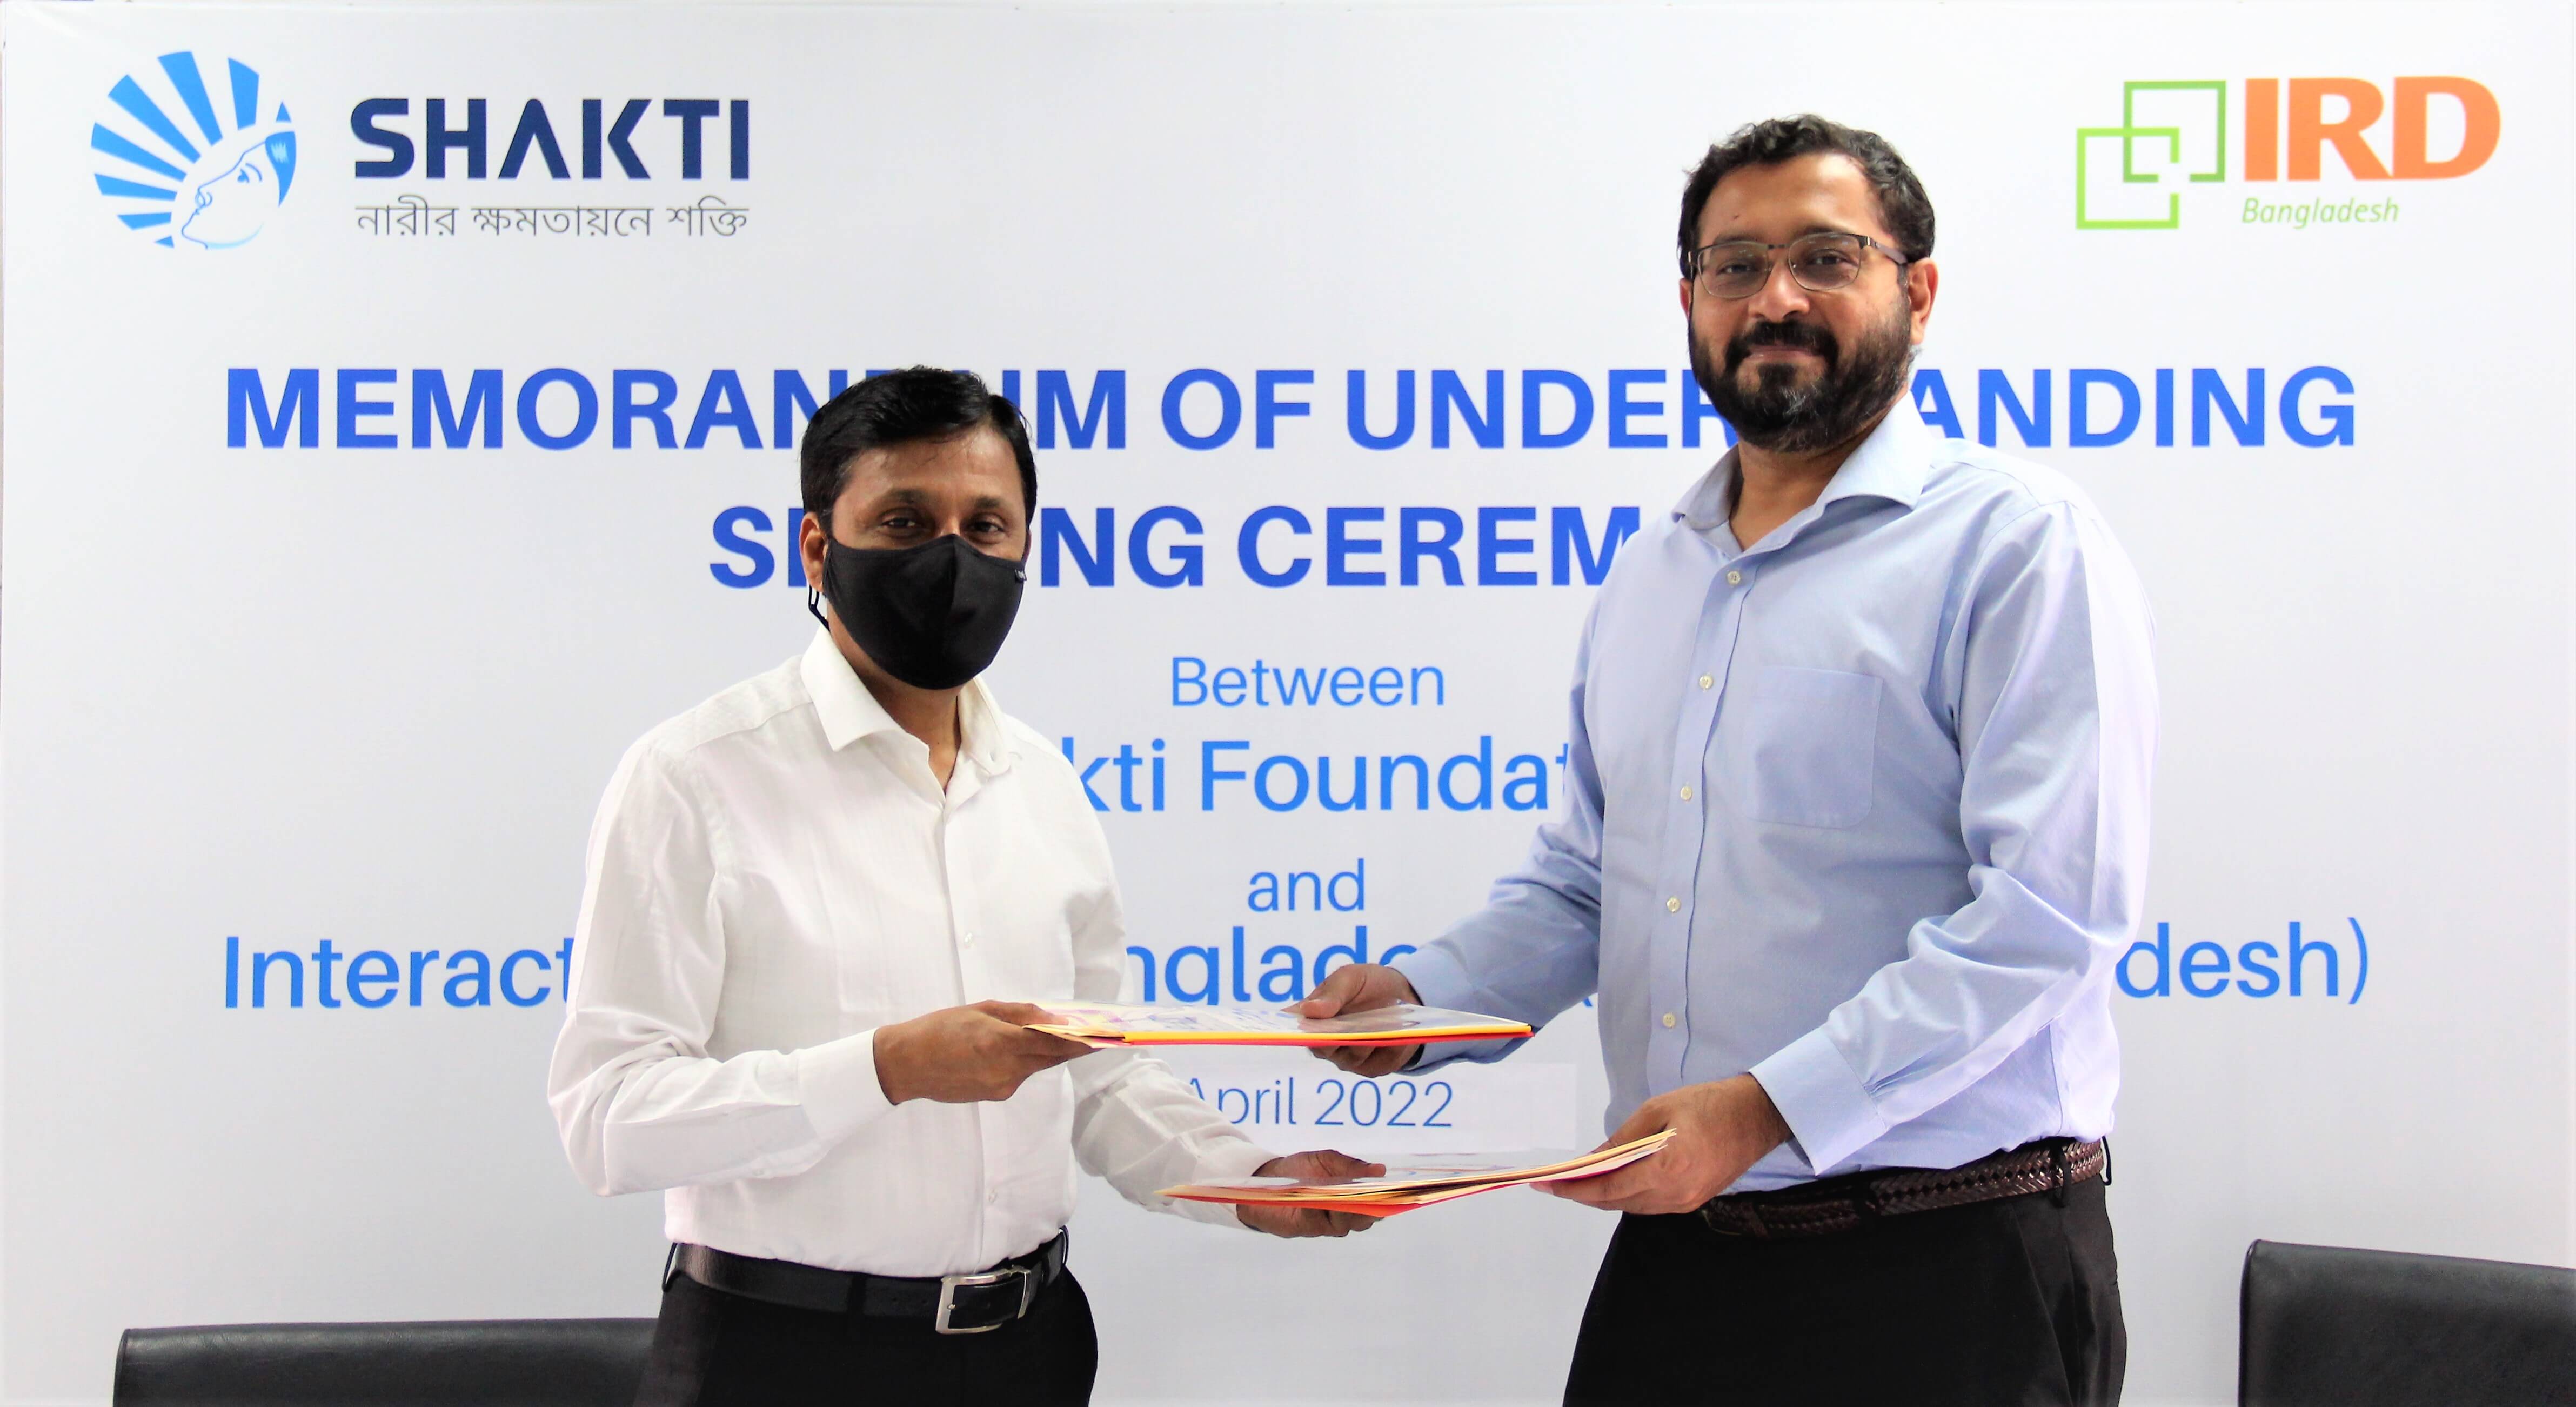 Shakti Foundation and IRD Global have initiated “School-Based COVID-19 Surveillance” project